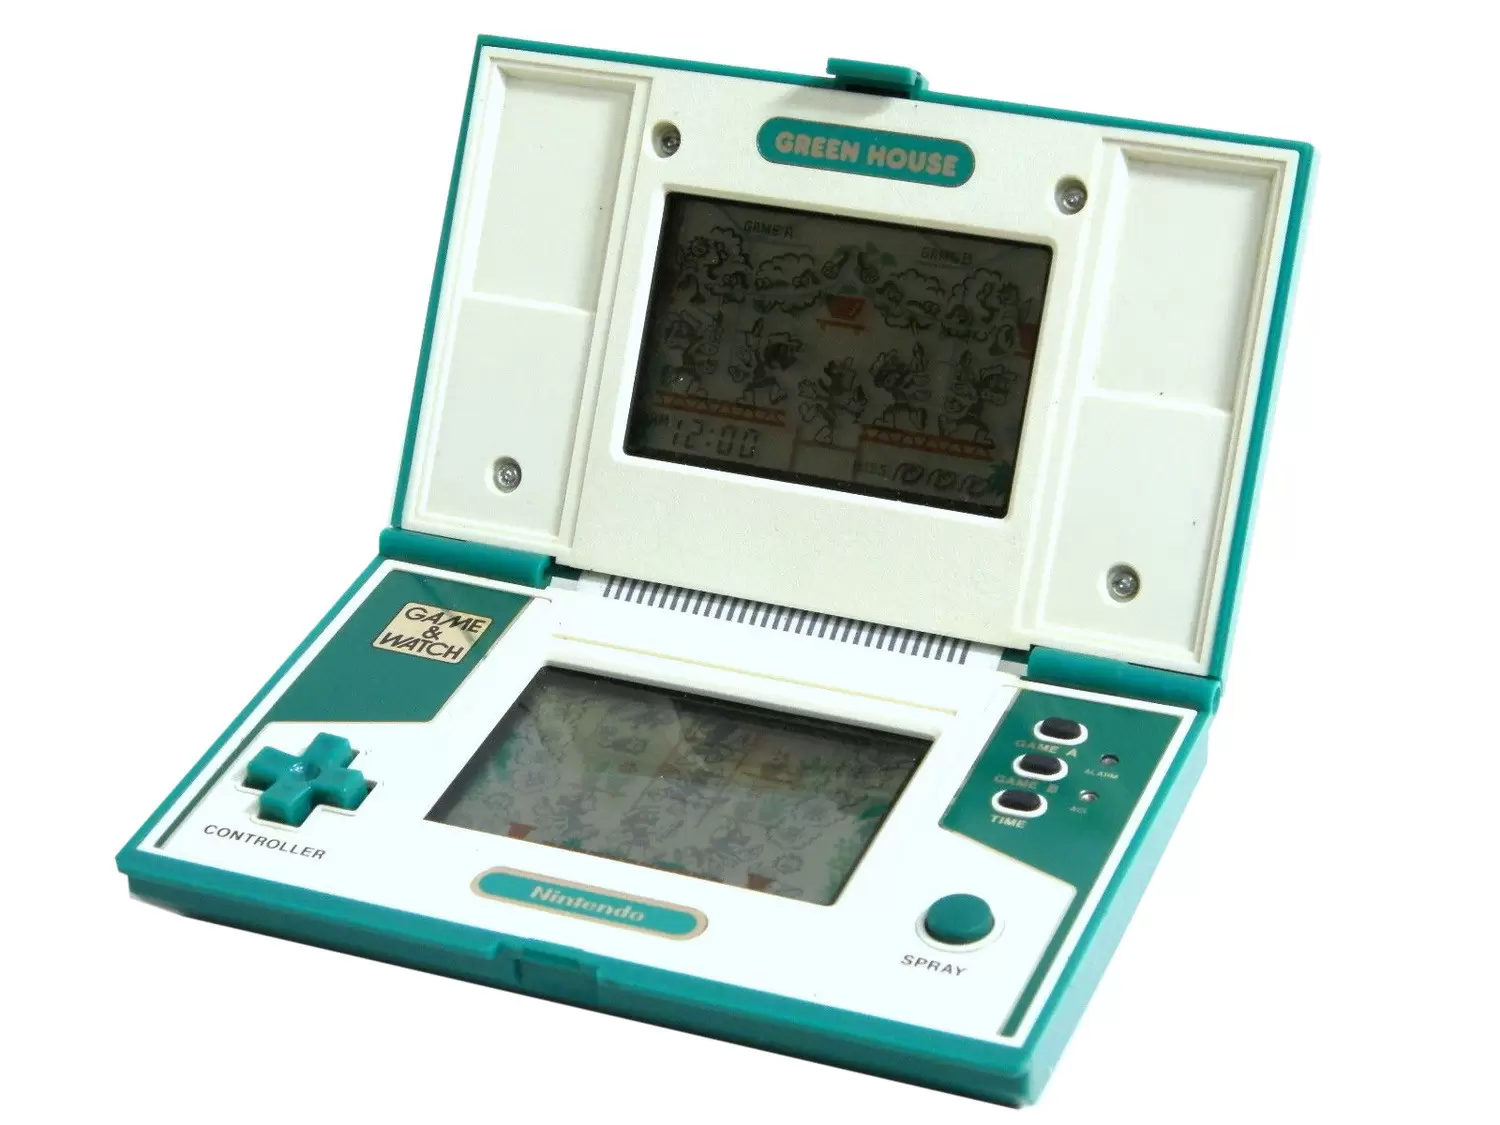 Game & Watch - Green House